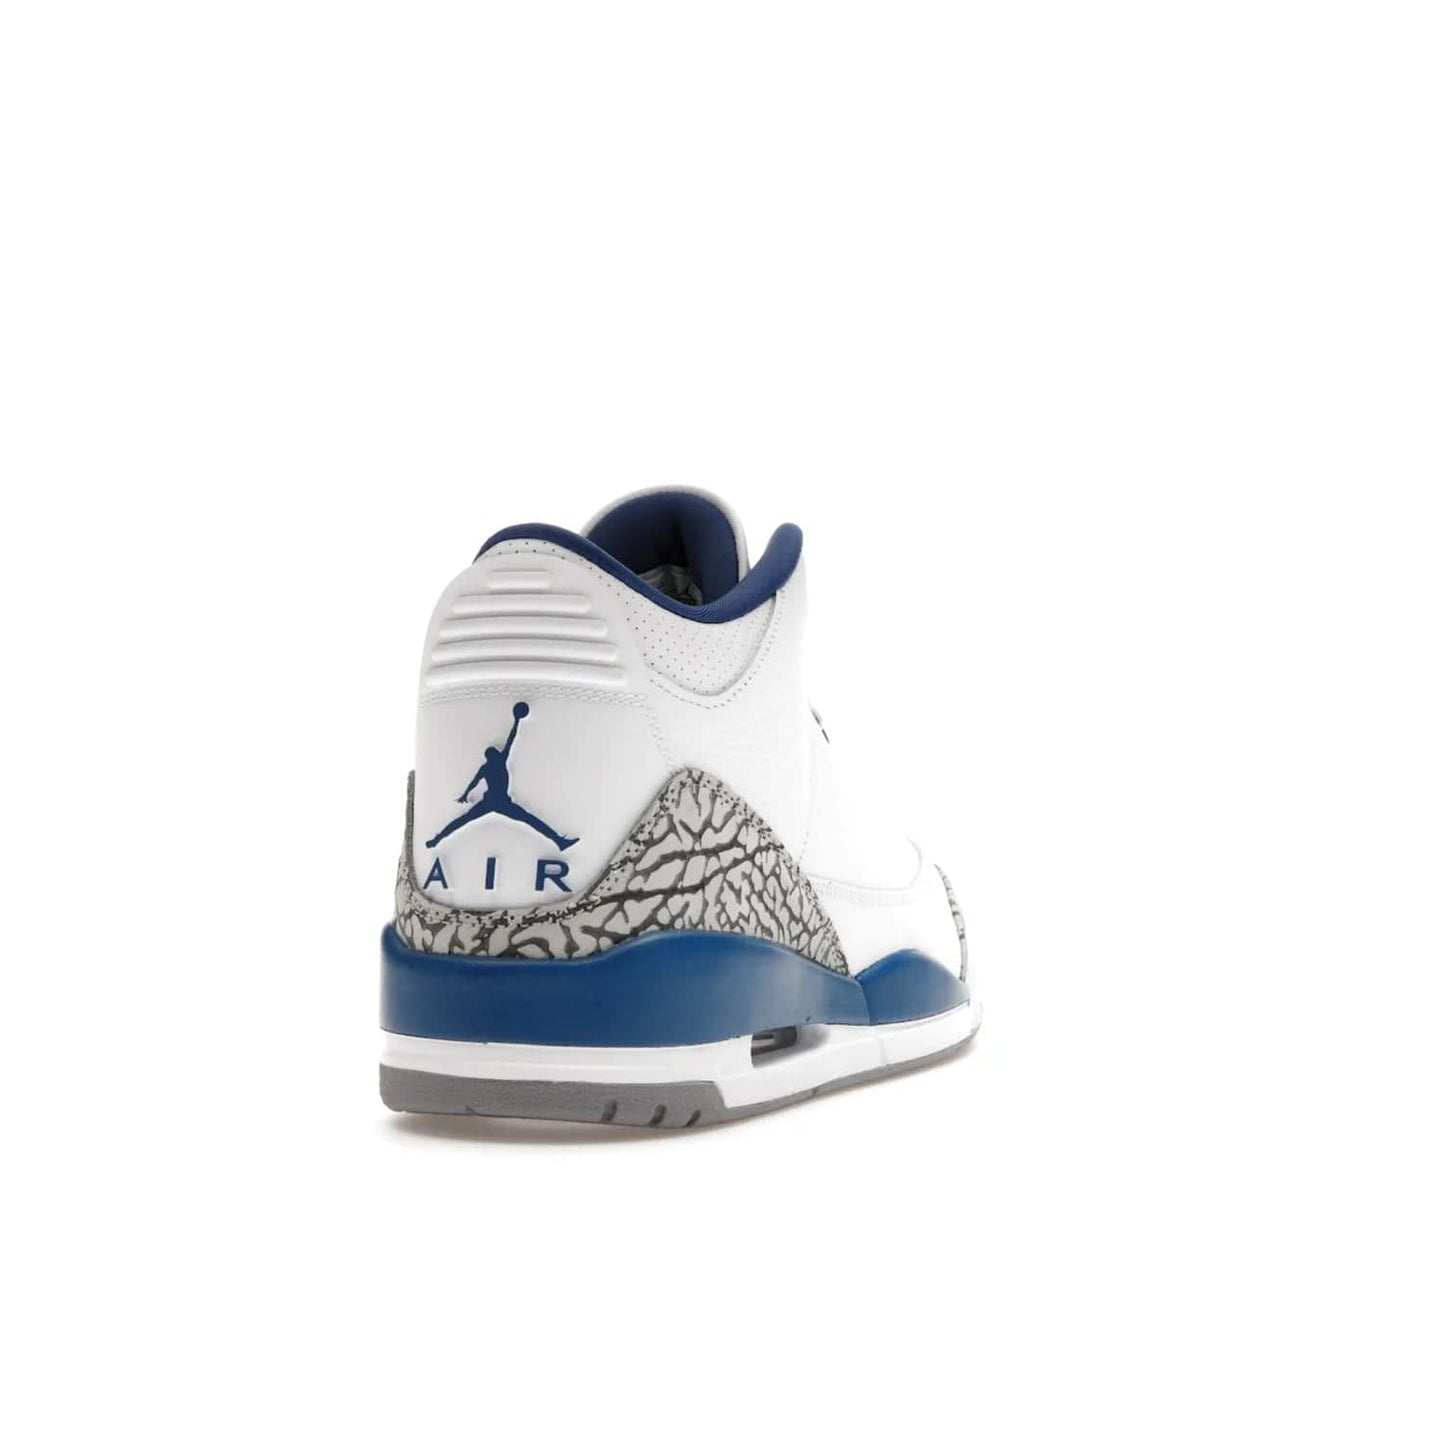 Jordan 3 Retro Wizards - Image 30 - Only at www.BallersClubKickz.com - ##
Special tribute sneaker from Jordan Brand to Michael Jordan's time with the Washington Wizards. Iconic white upper, orange Jumpman logo, blue accents, metallic copper details, and cement grey outsole. Buy the Air Jordan 3 Retro Wizards April 29, 2023.